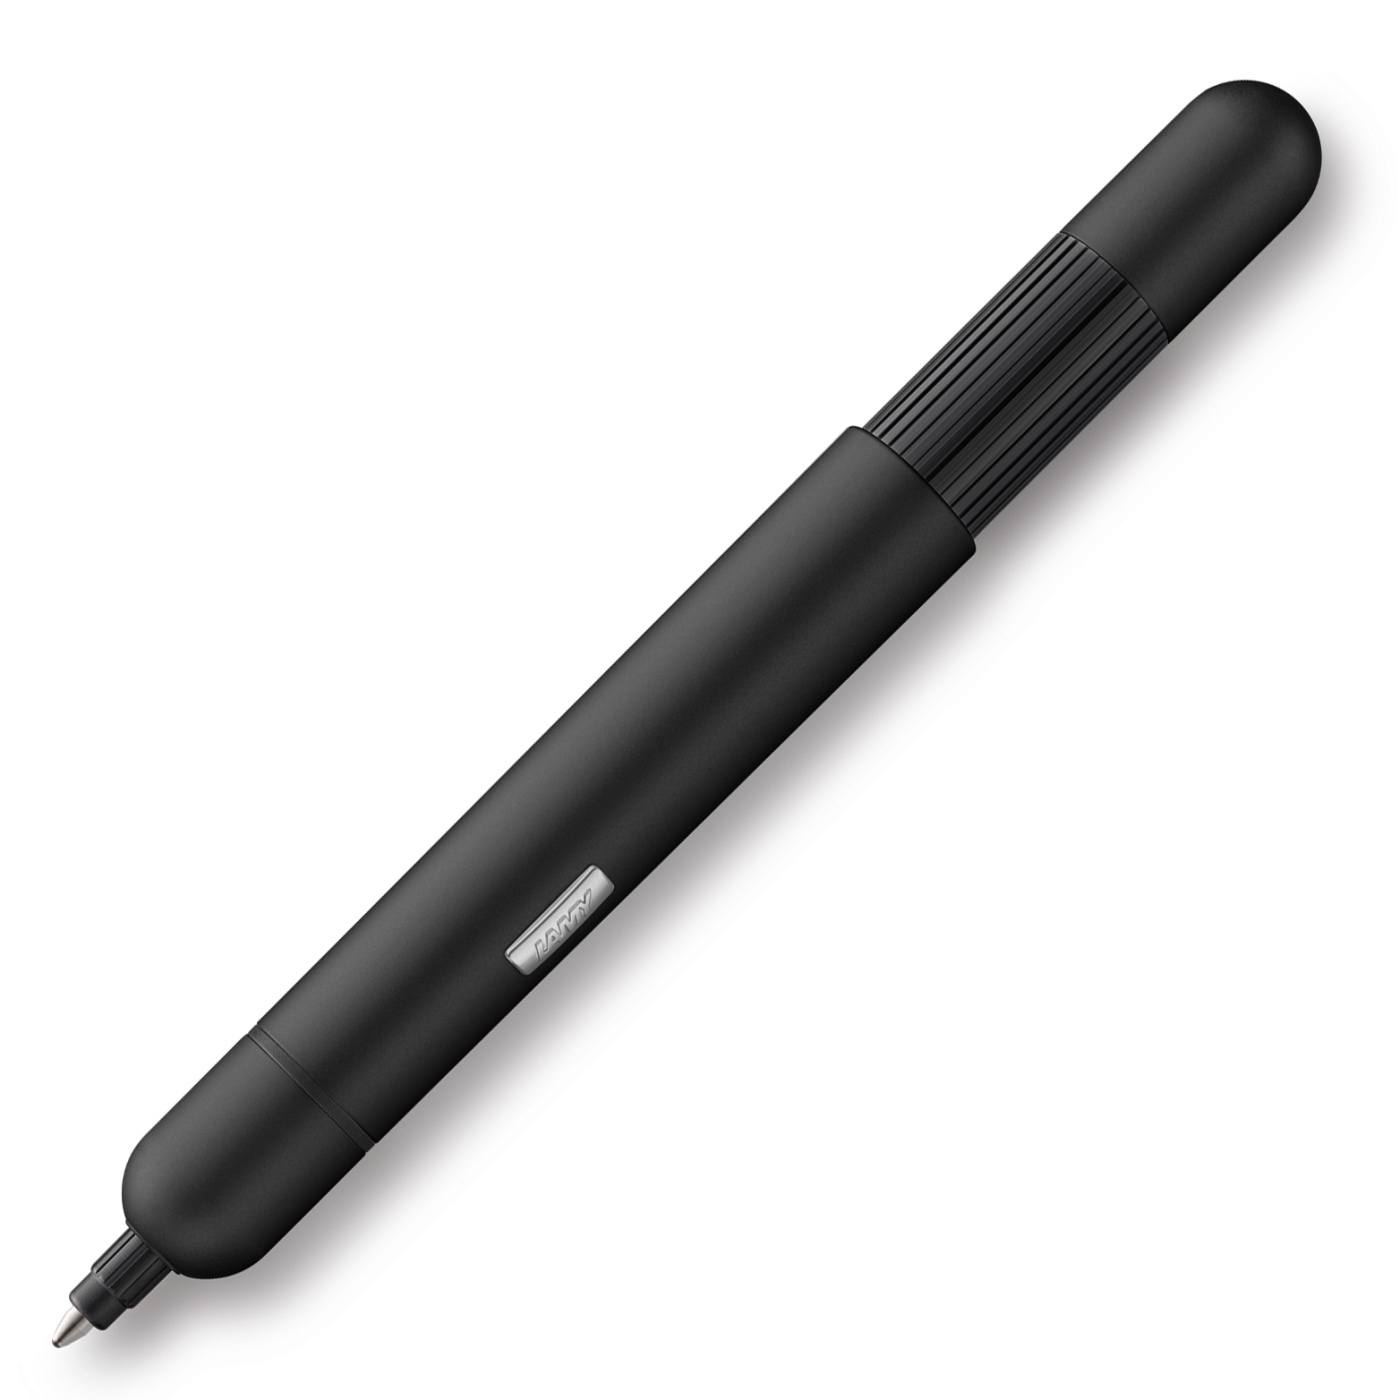 Pico Ballpoint Black in the group Pens / Fine Writing / Gift Pens at Pen Store (101887)